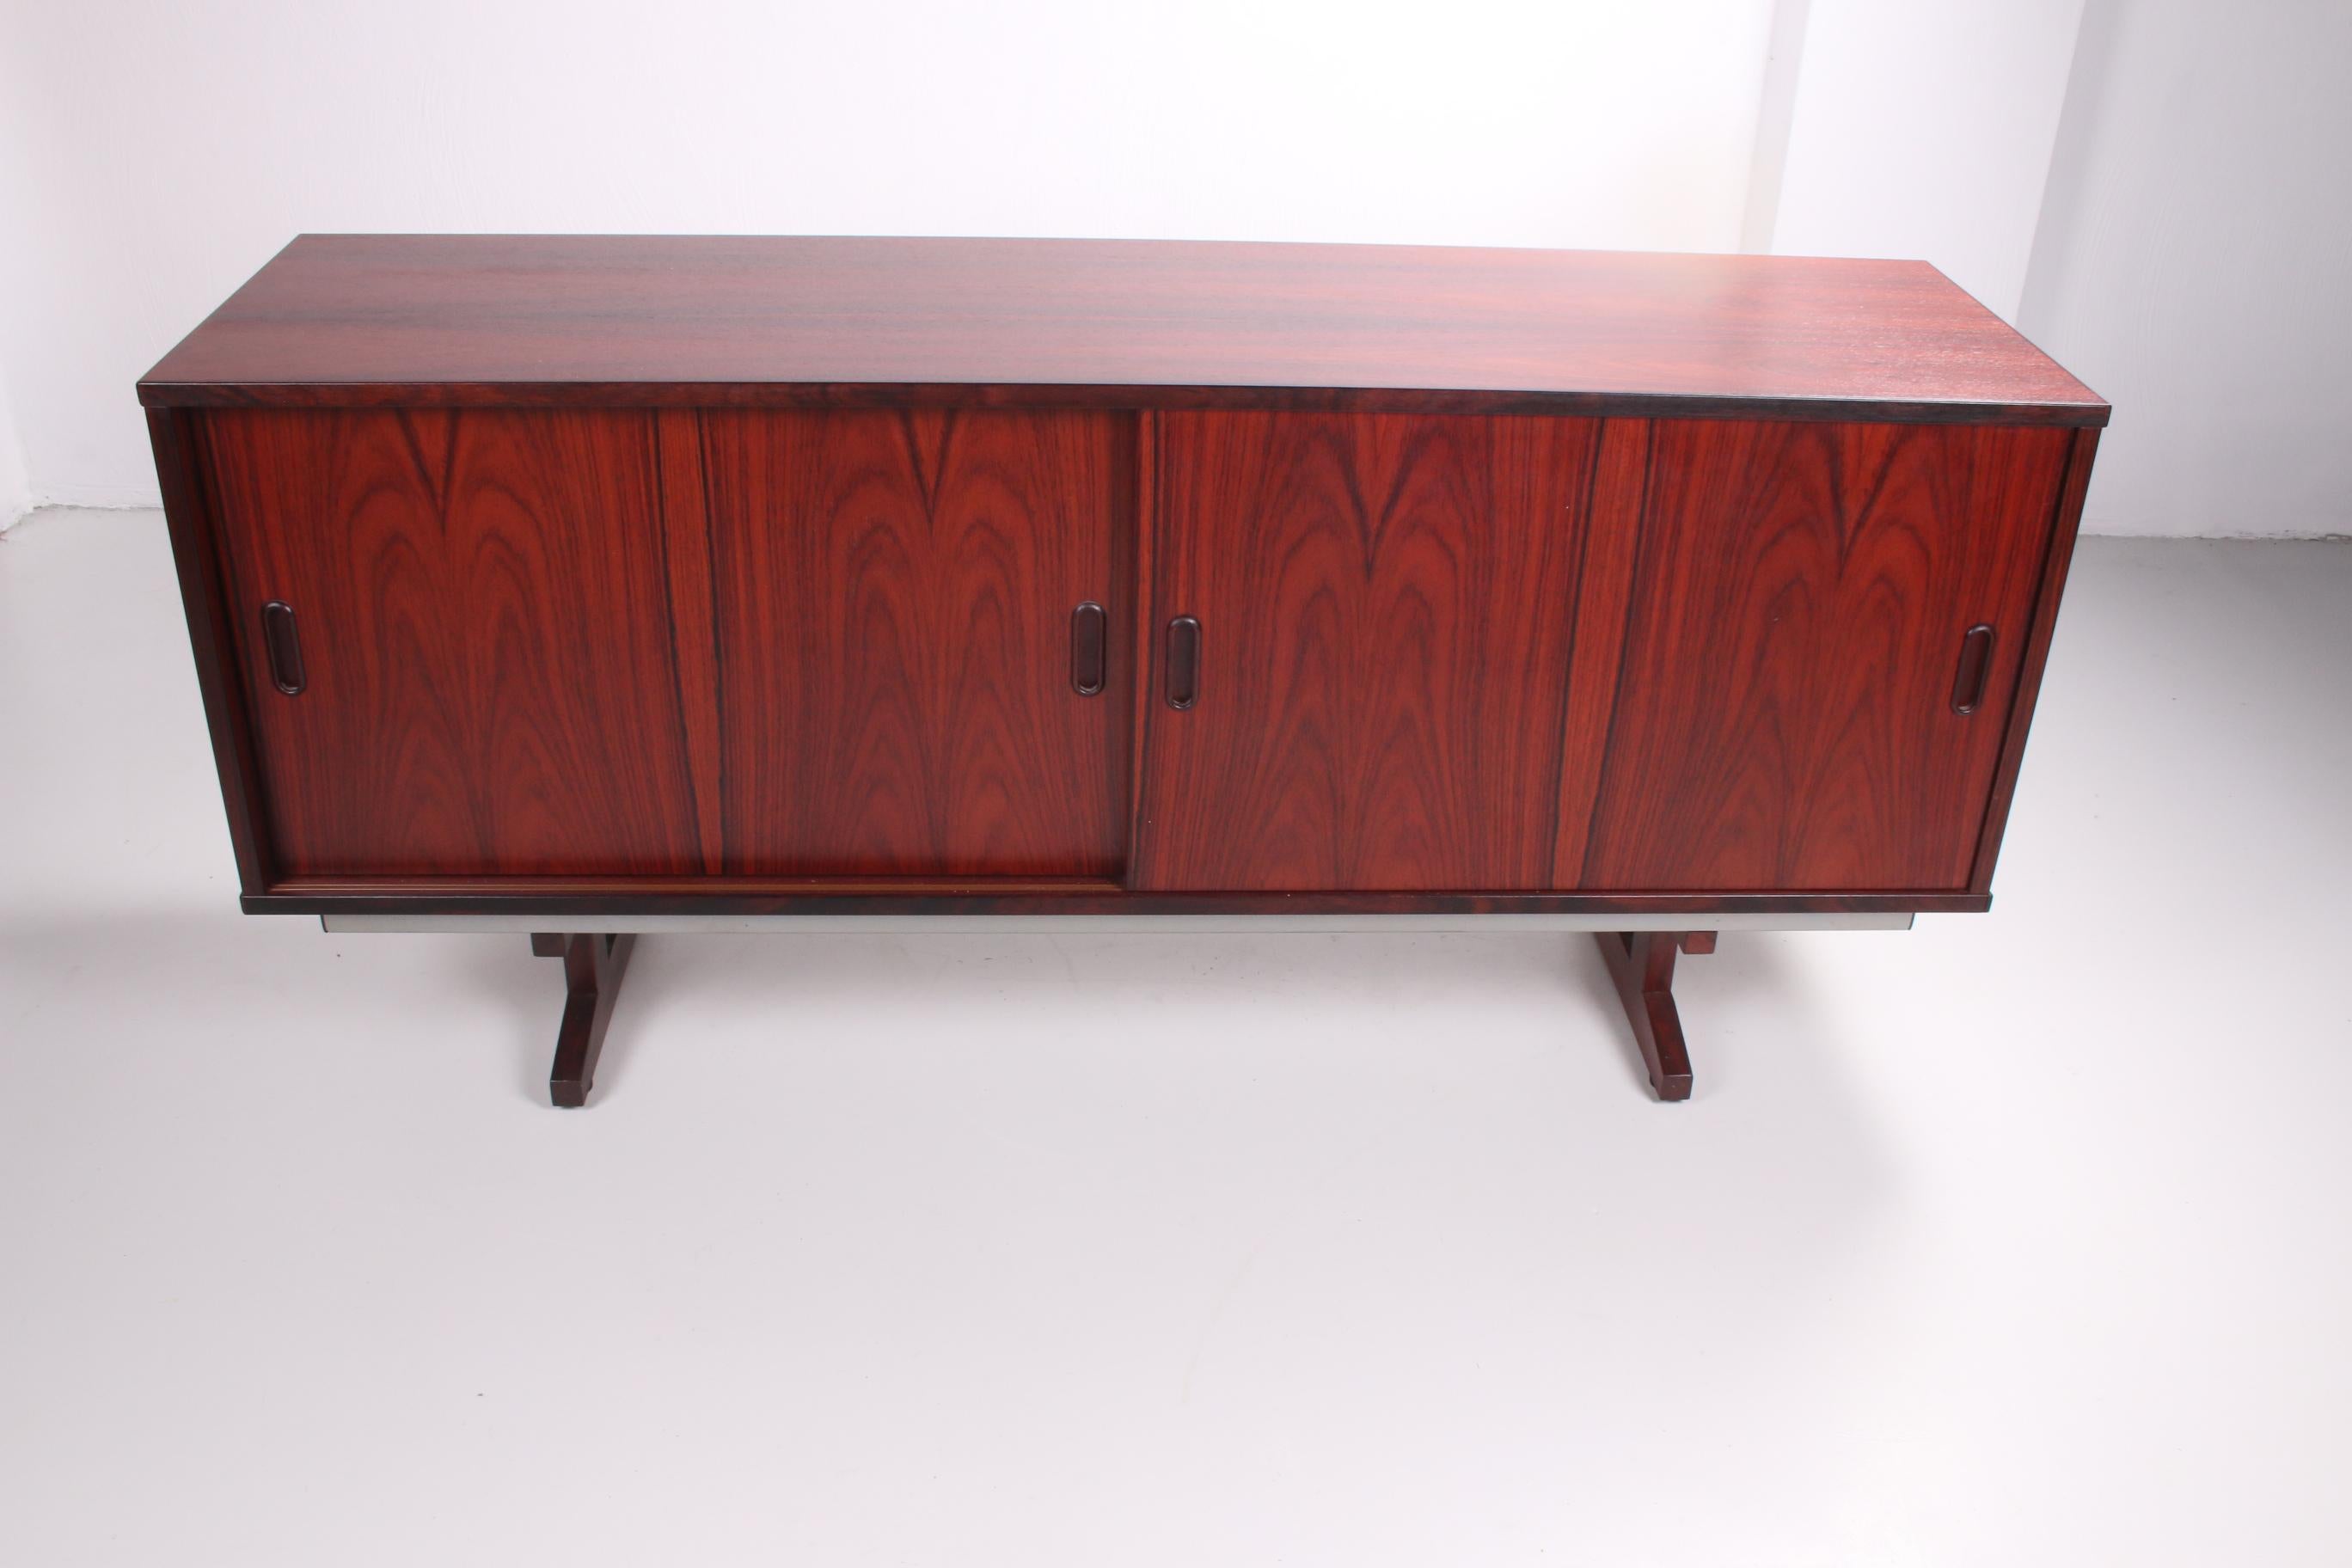 This beautiful cabinet is made with darkwood. It will be a wonderful addition to any interior, warming up the room with it's deep brown-red colour. 
Behind the sliding doors are two bigger shelves and five drawers. This means it has more than enough